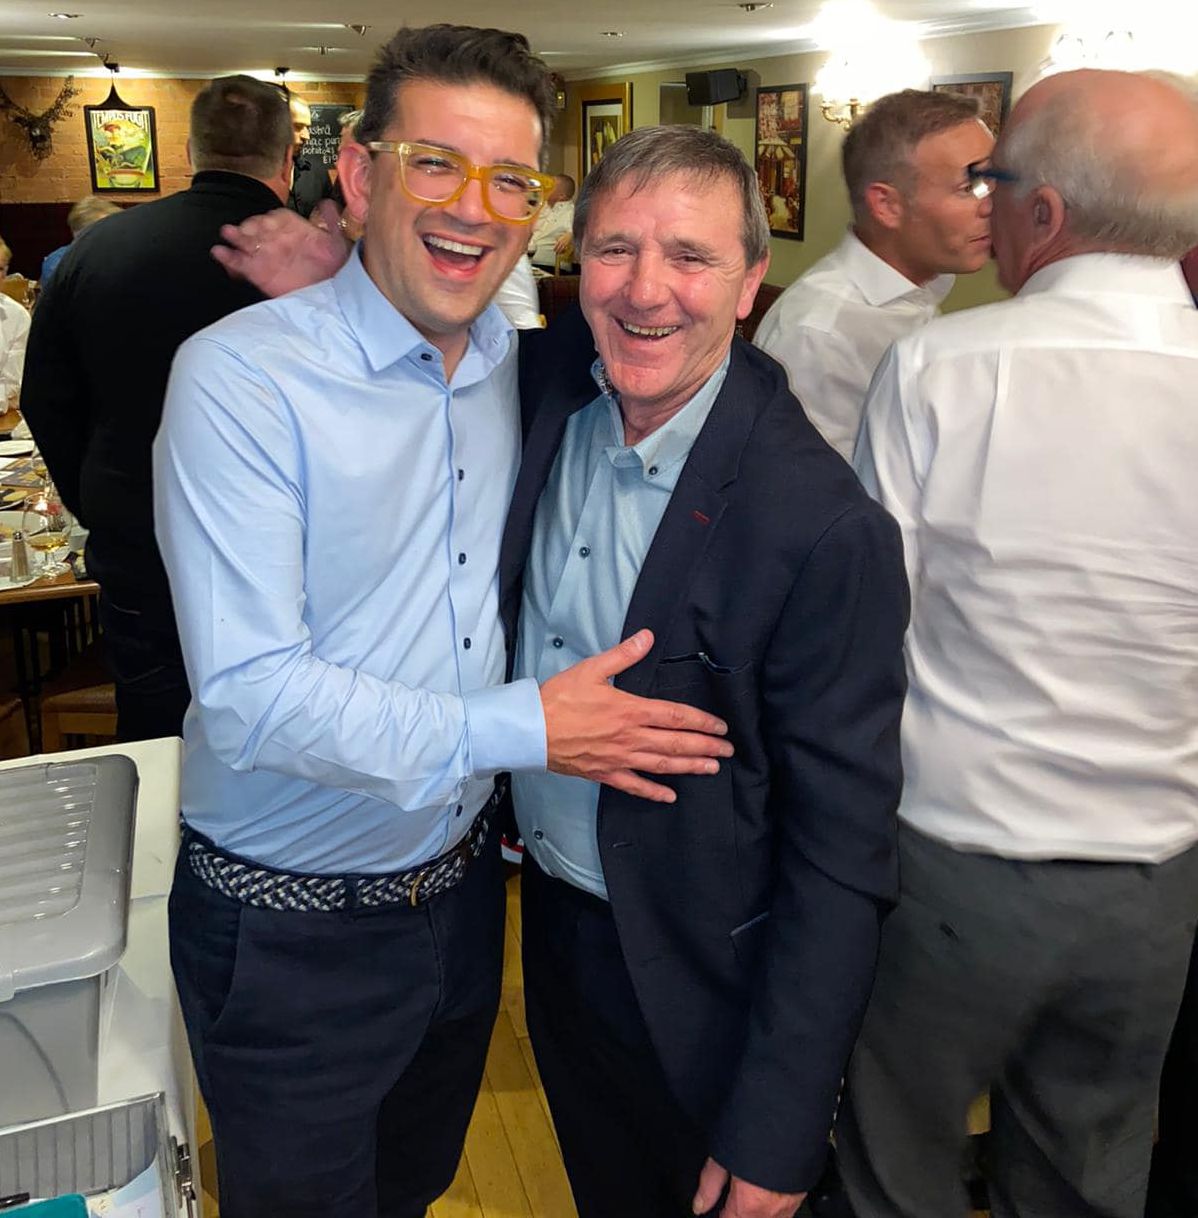 Neil Gokcen (left) hosted a fundraising Sportsmans Dinner at Auberge restaurant in Southport to raise money for The Larks / Marina Dalglish Appeal in memory of his wife Catherine